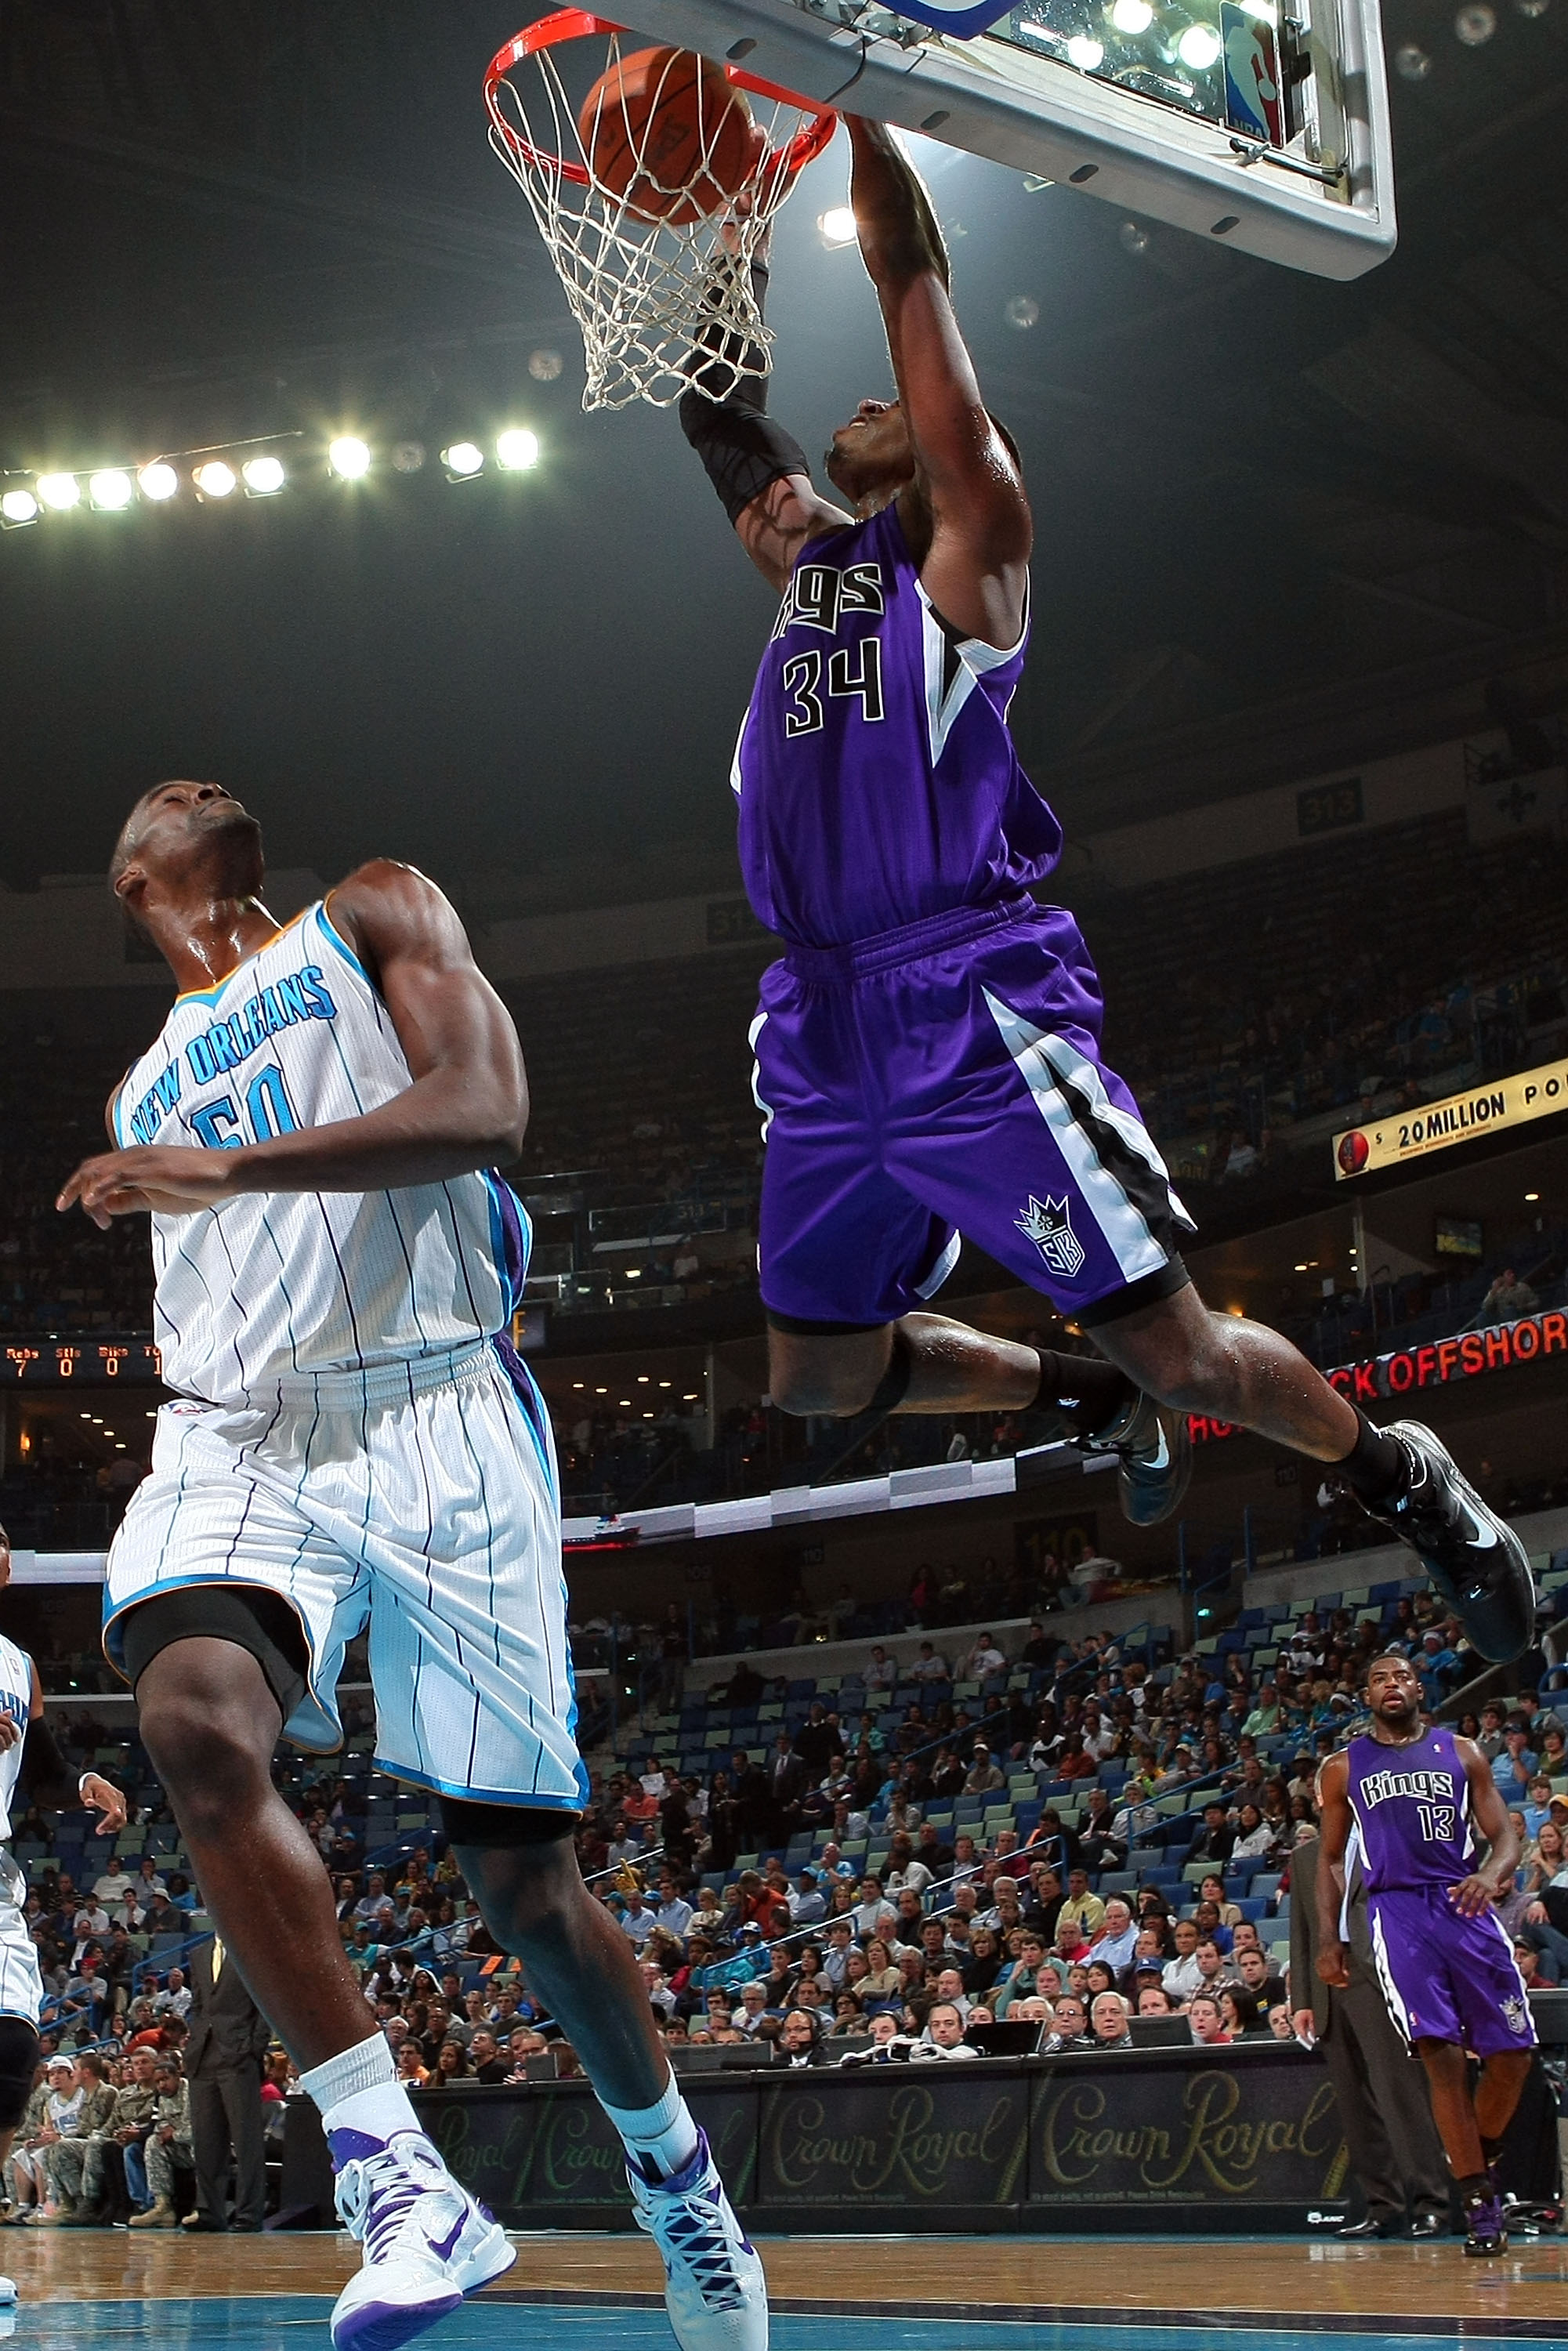 NEW ORLEANS, LA - DECEMBER 15:  Jason Thompson #34 of the Sacramento Kings dunks the ball over Emeka Okafor #50 of the New Orleans Hornets  at the New Orleans Arena on December 15, 2010 in New Orleans, Louisiana.  NOTE TO USER: User expressly acknowledges